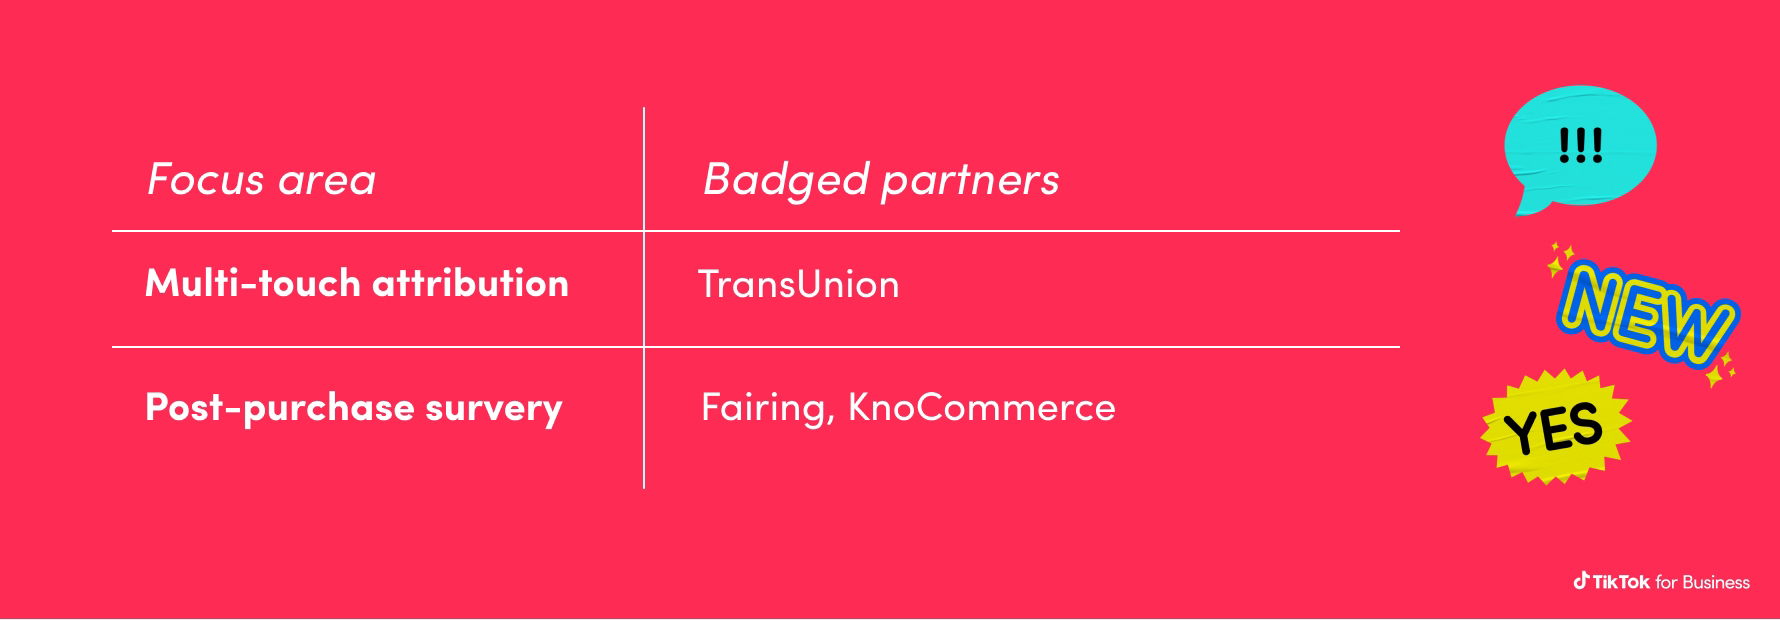 CA Badged Partners 1